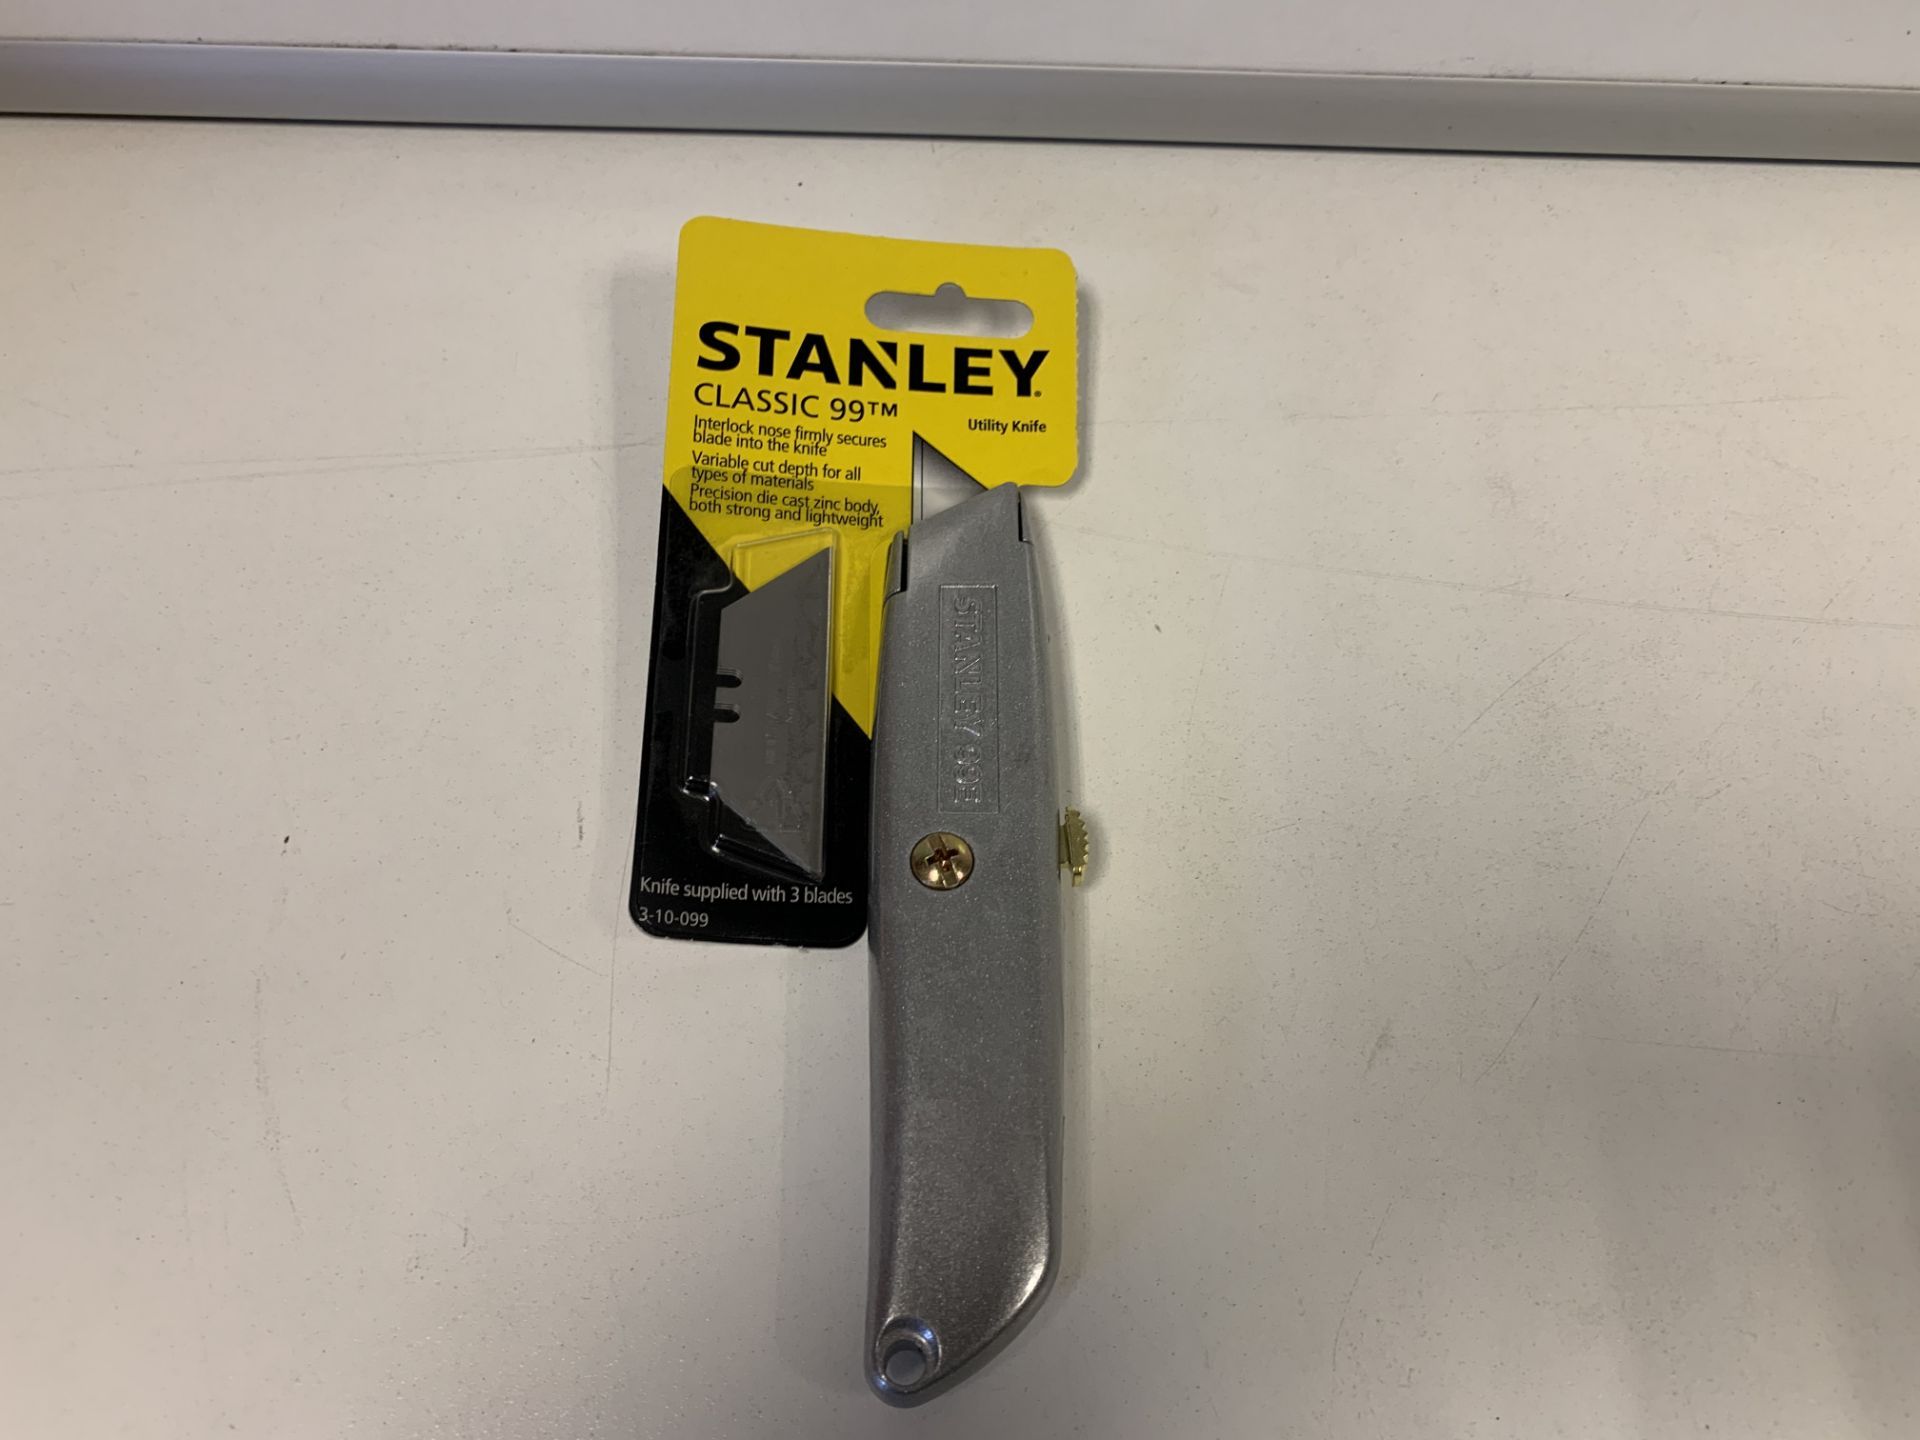 8 x NEW PACKAGED STANLEY CLASSIC 99 KNIFE WITH 3 BLADES (18+ ONLY - ID REQUIRED) (780/30)